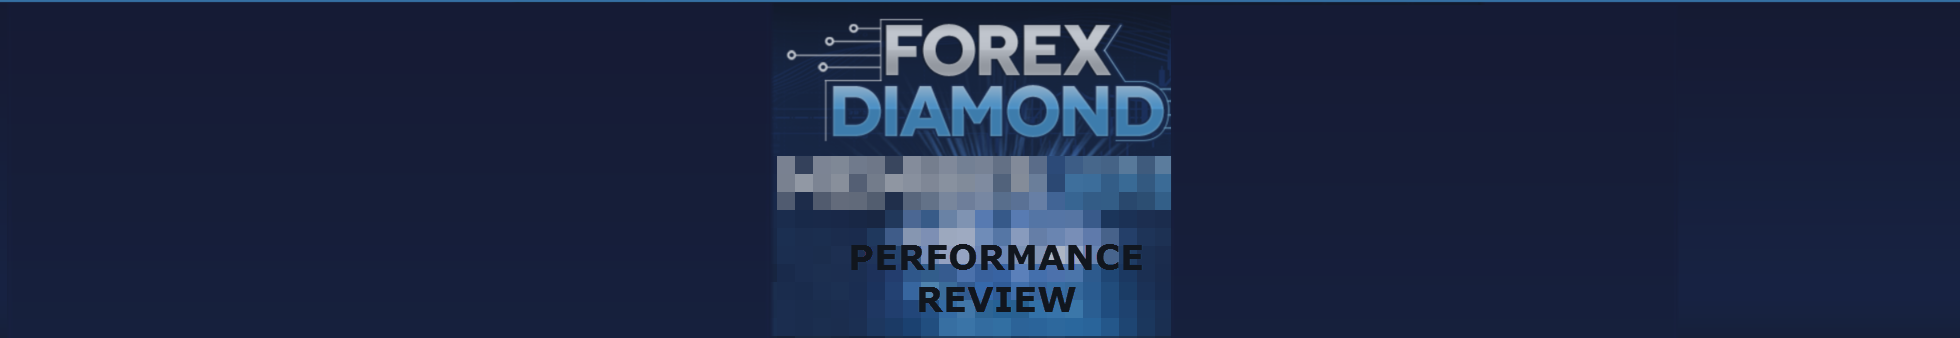 Review: Forex Diamond Forex EA | 3 Strategies in 1  | Impressive 14 years back test and two years on live market results